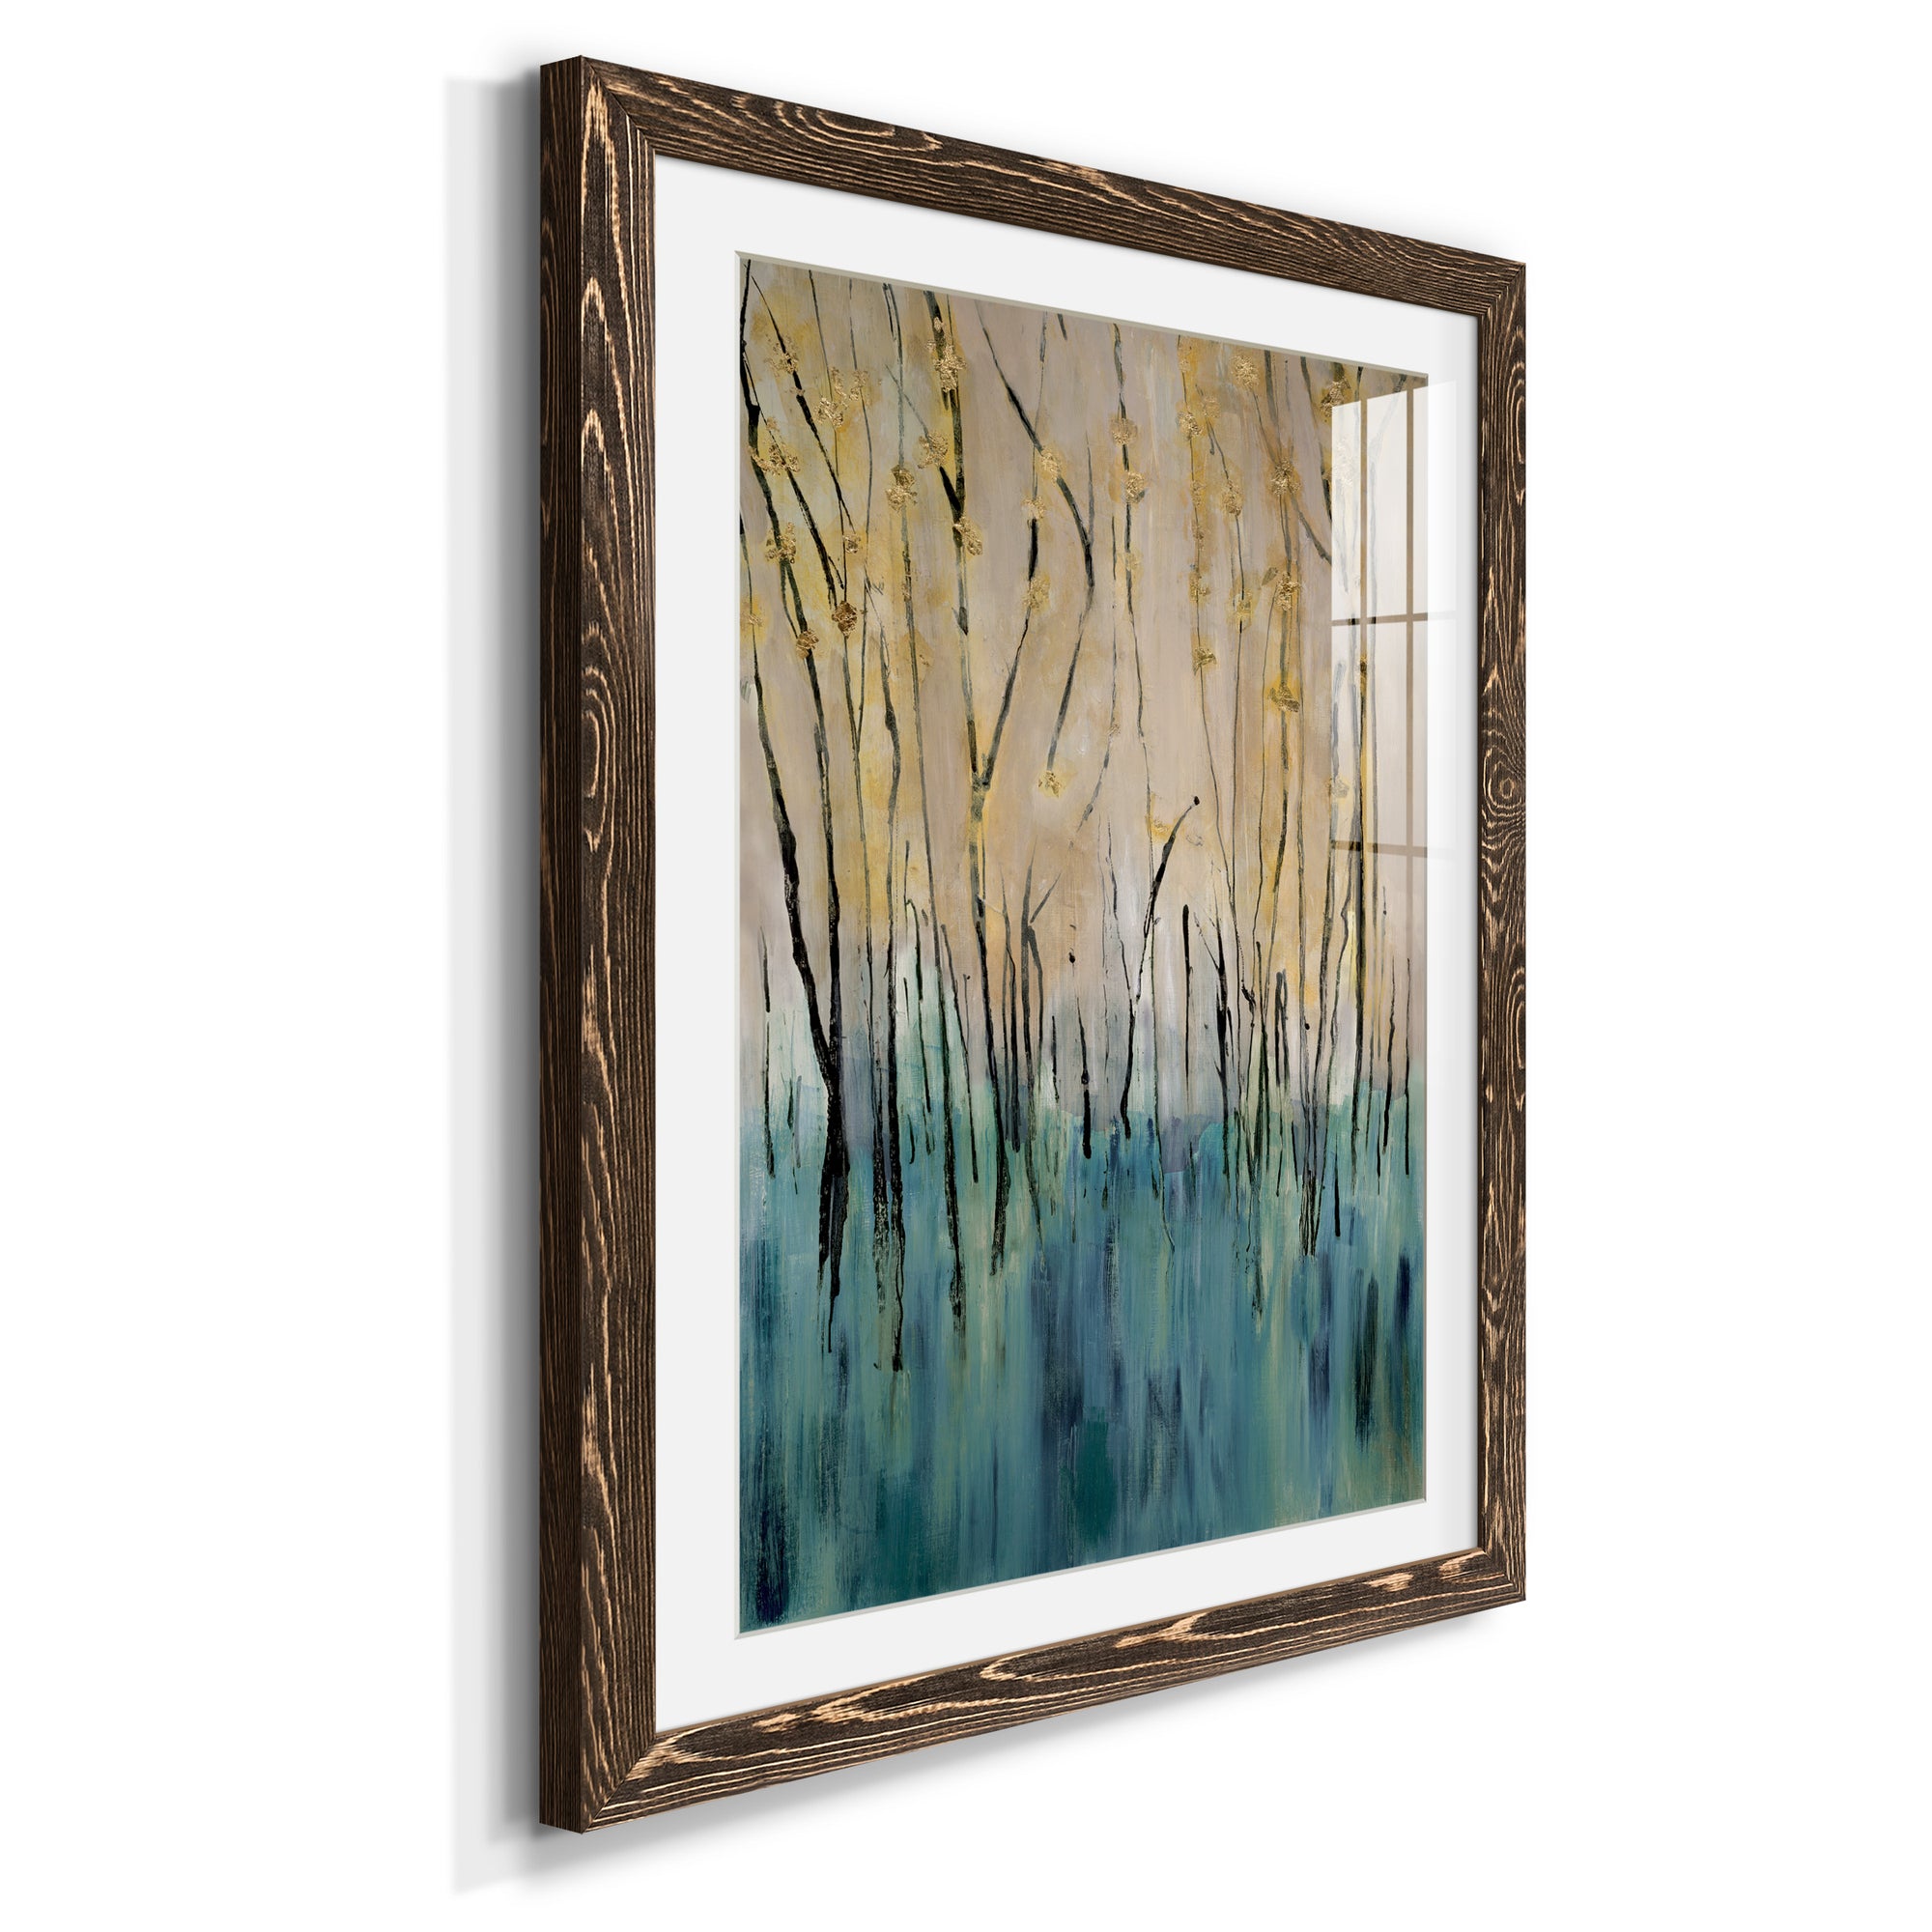 Mountain Air - Premium Framed Print - Distressed Barnwood Frame - Ready to Hang